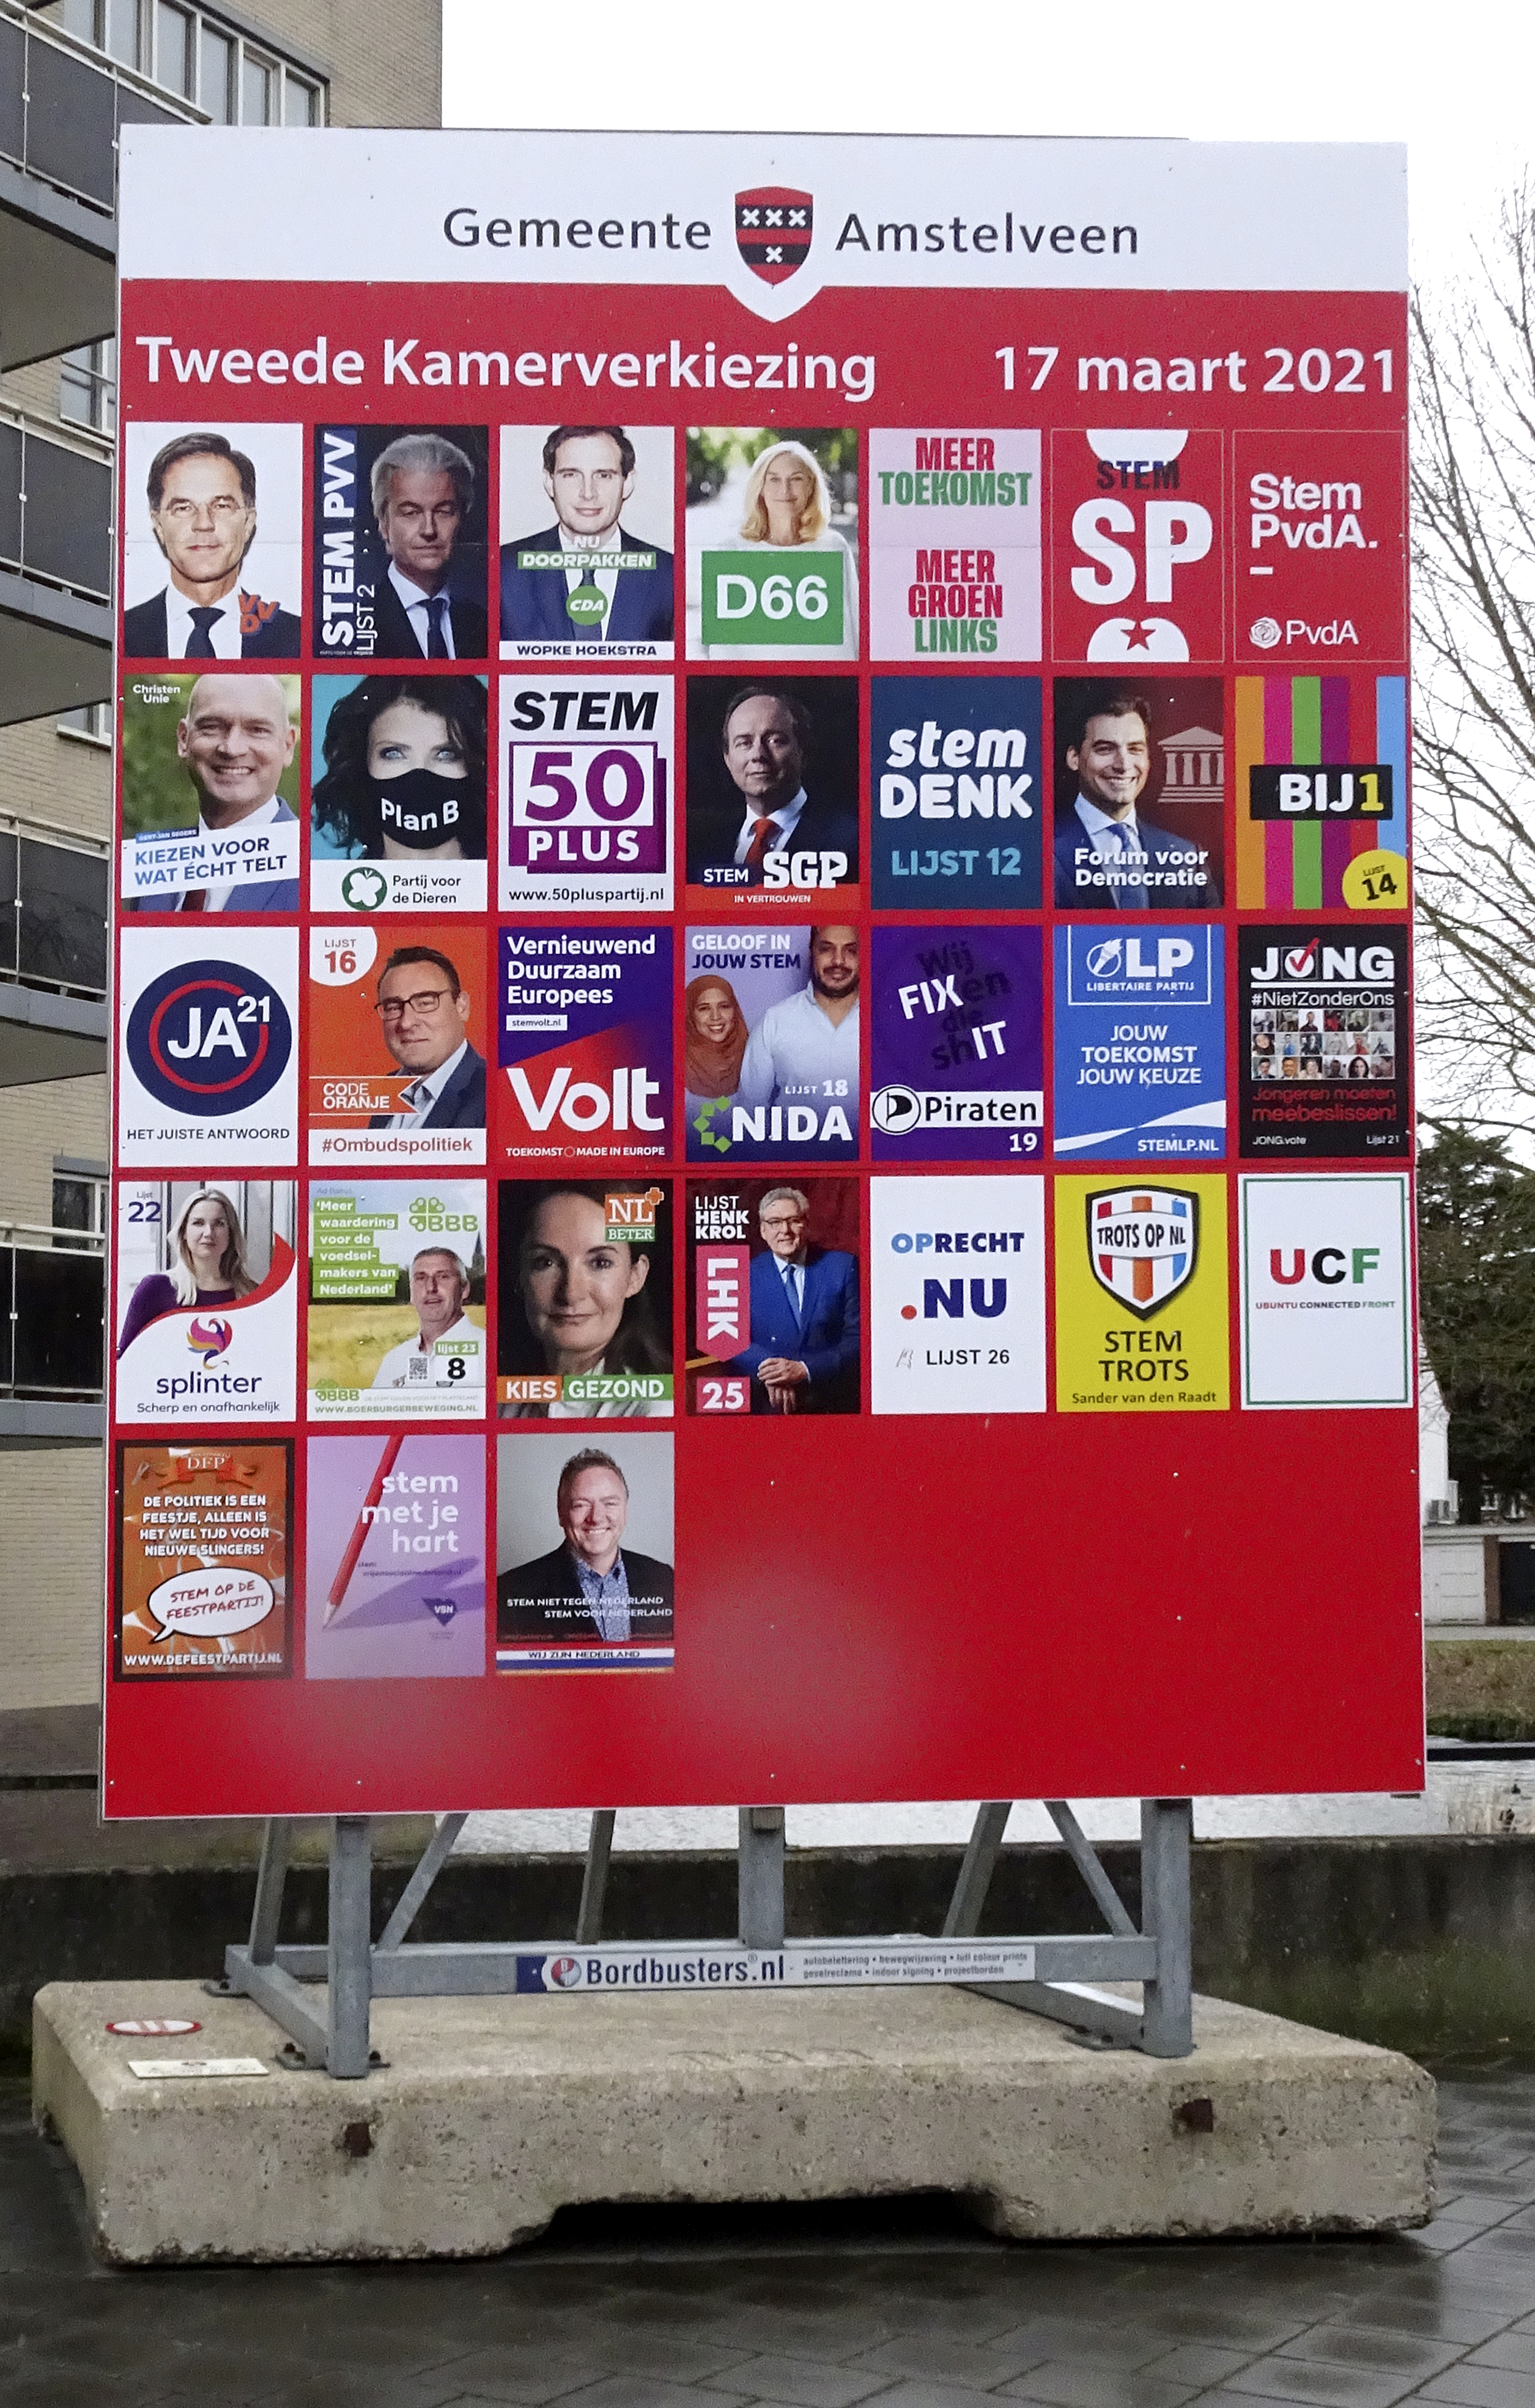 Election billboard in the Netherlands, made up
of 31 placards bearing various parties' logos